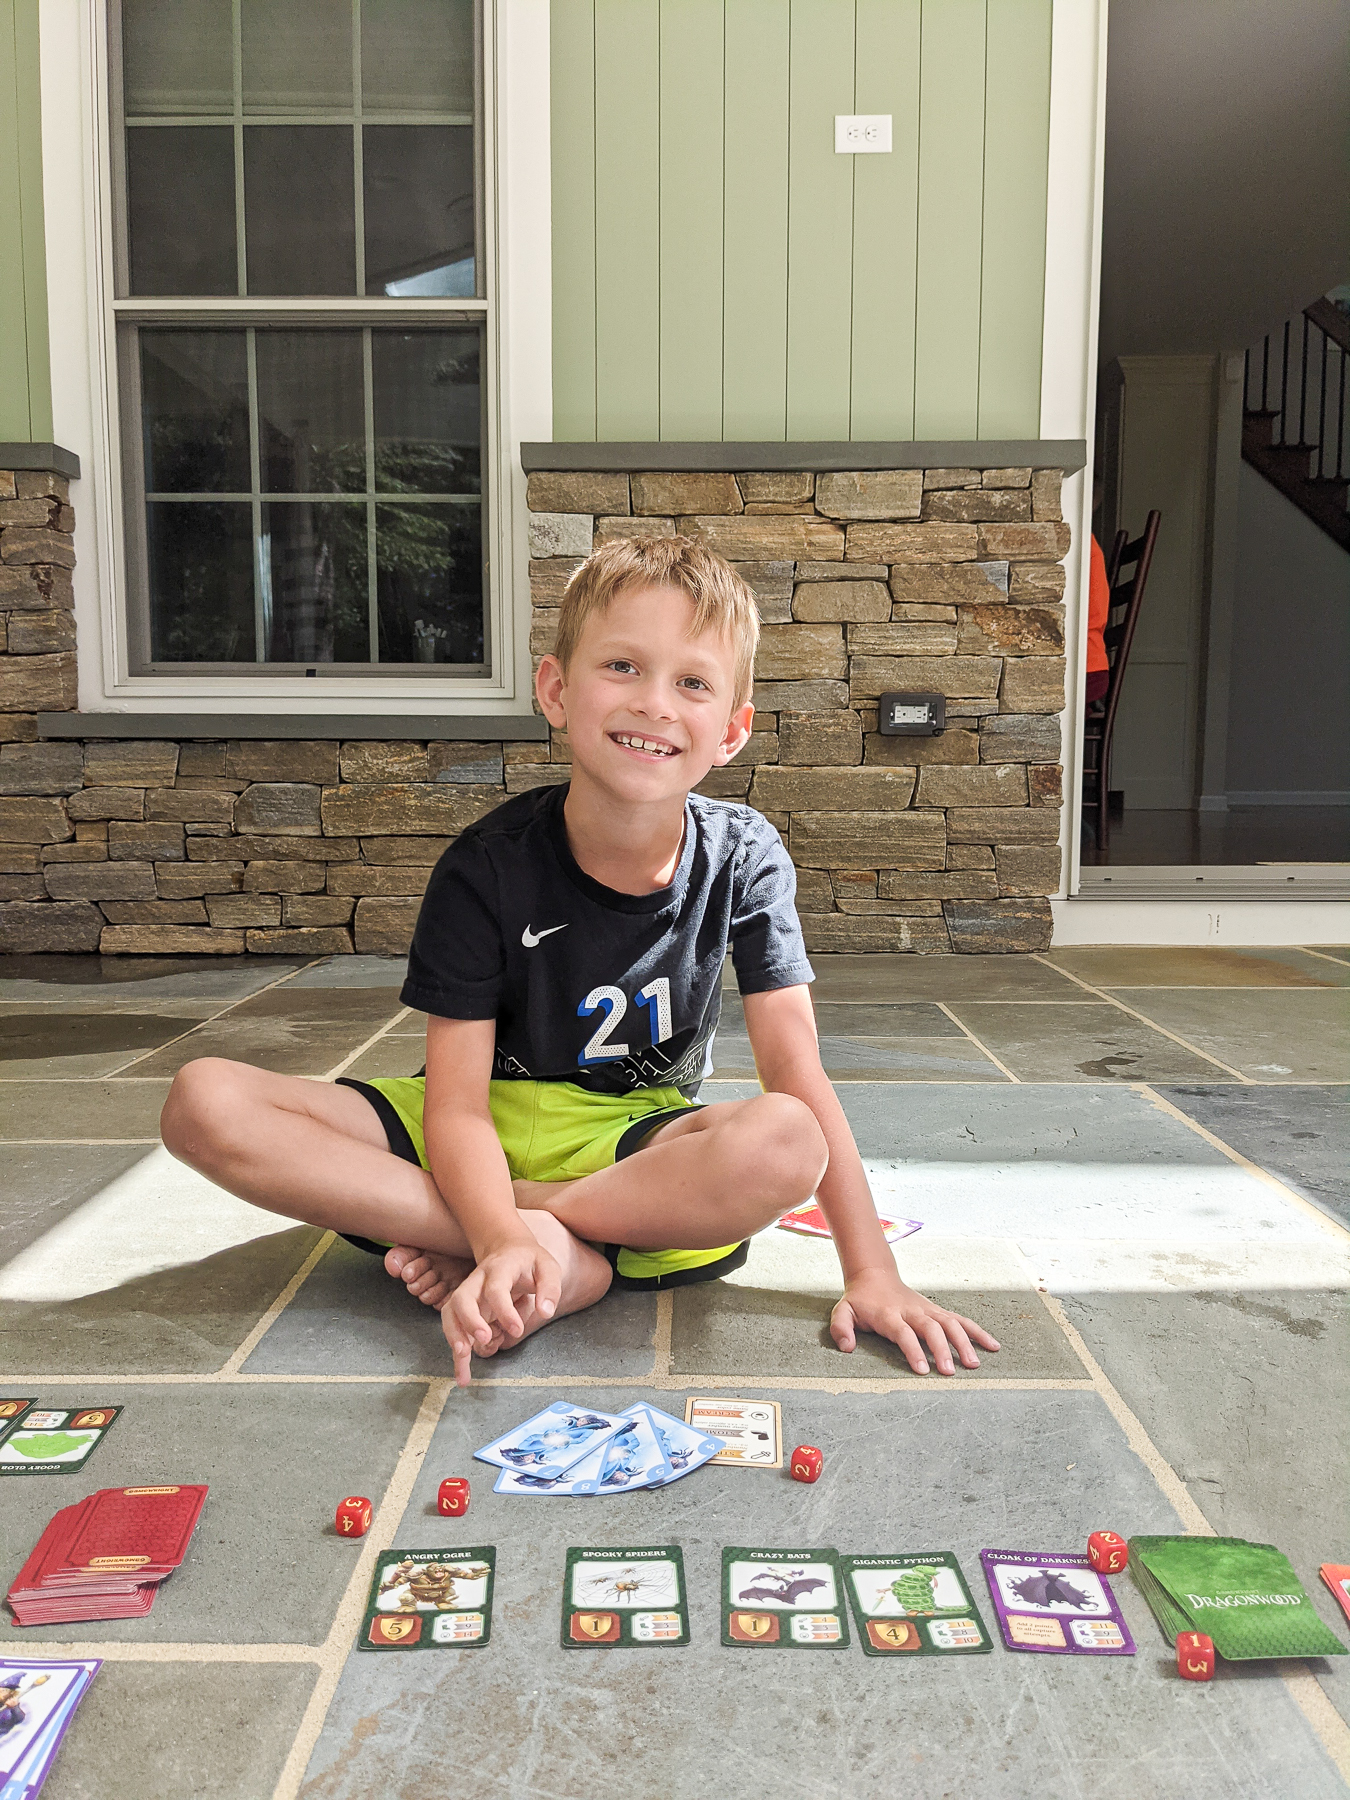 15 Great Family Board Games + Card Games We Love